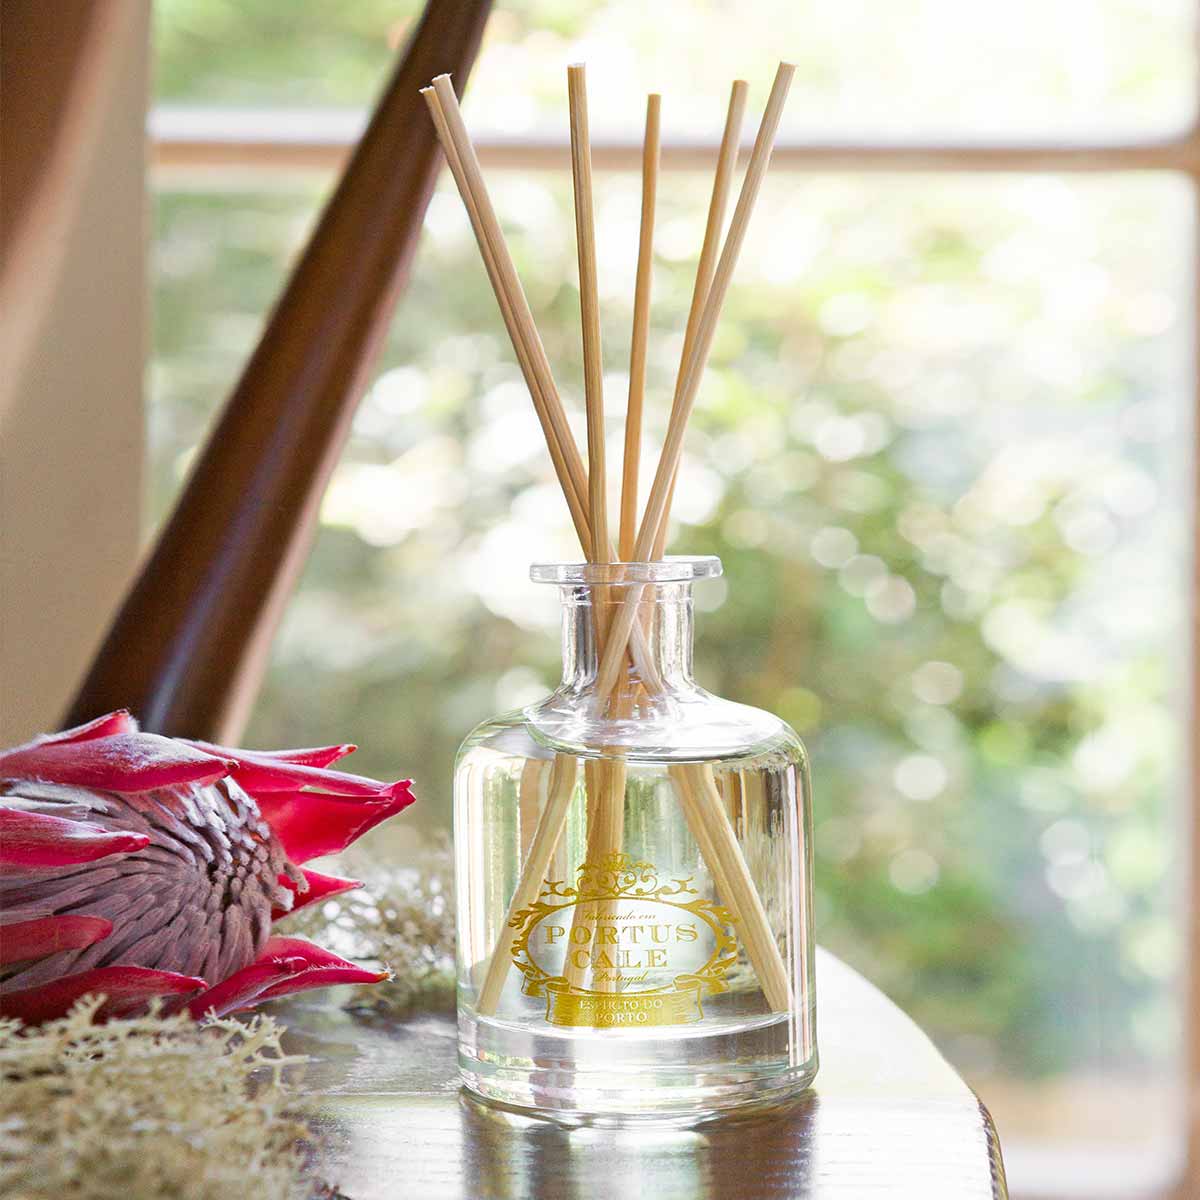 Castelbel Portus Cale Noble Red Clear Glass Fragrance Diffuser - 250Ml